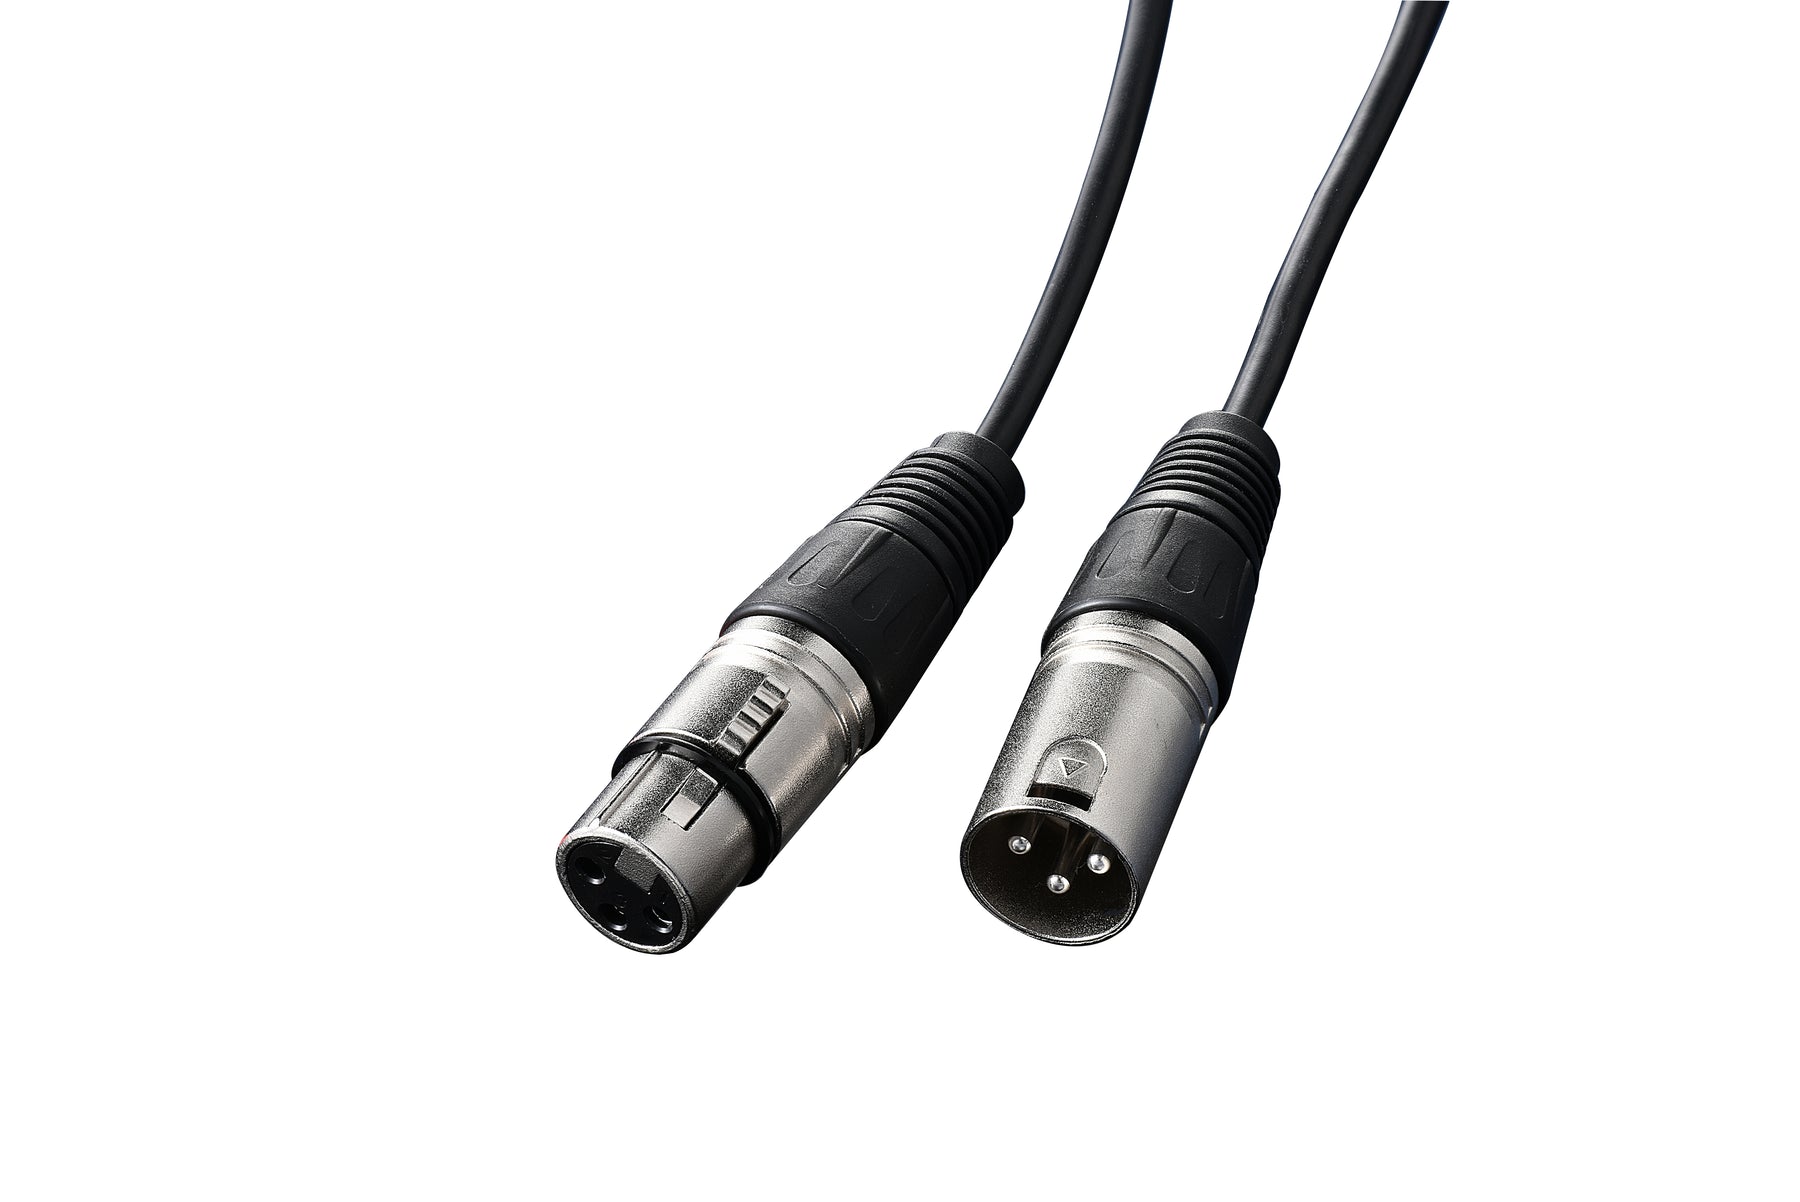 IBRA XLR Mic Cable Premium Quality Pro Microphone Lead | Balanced Male XLR to Female XLR | 0.5 Metre | Clearer Sound for PA Systems, Studio Recording, Mixers, Amplification & Speakers - BLACK